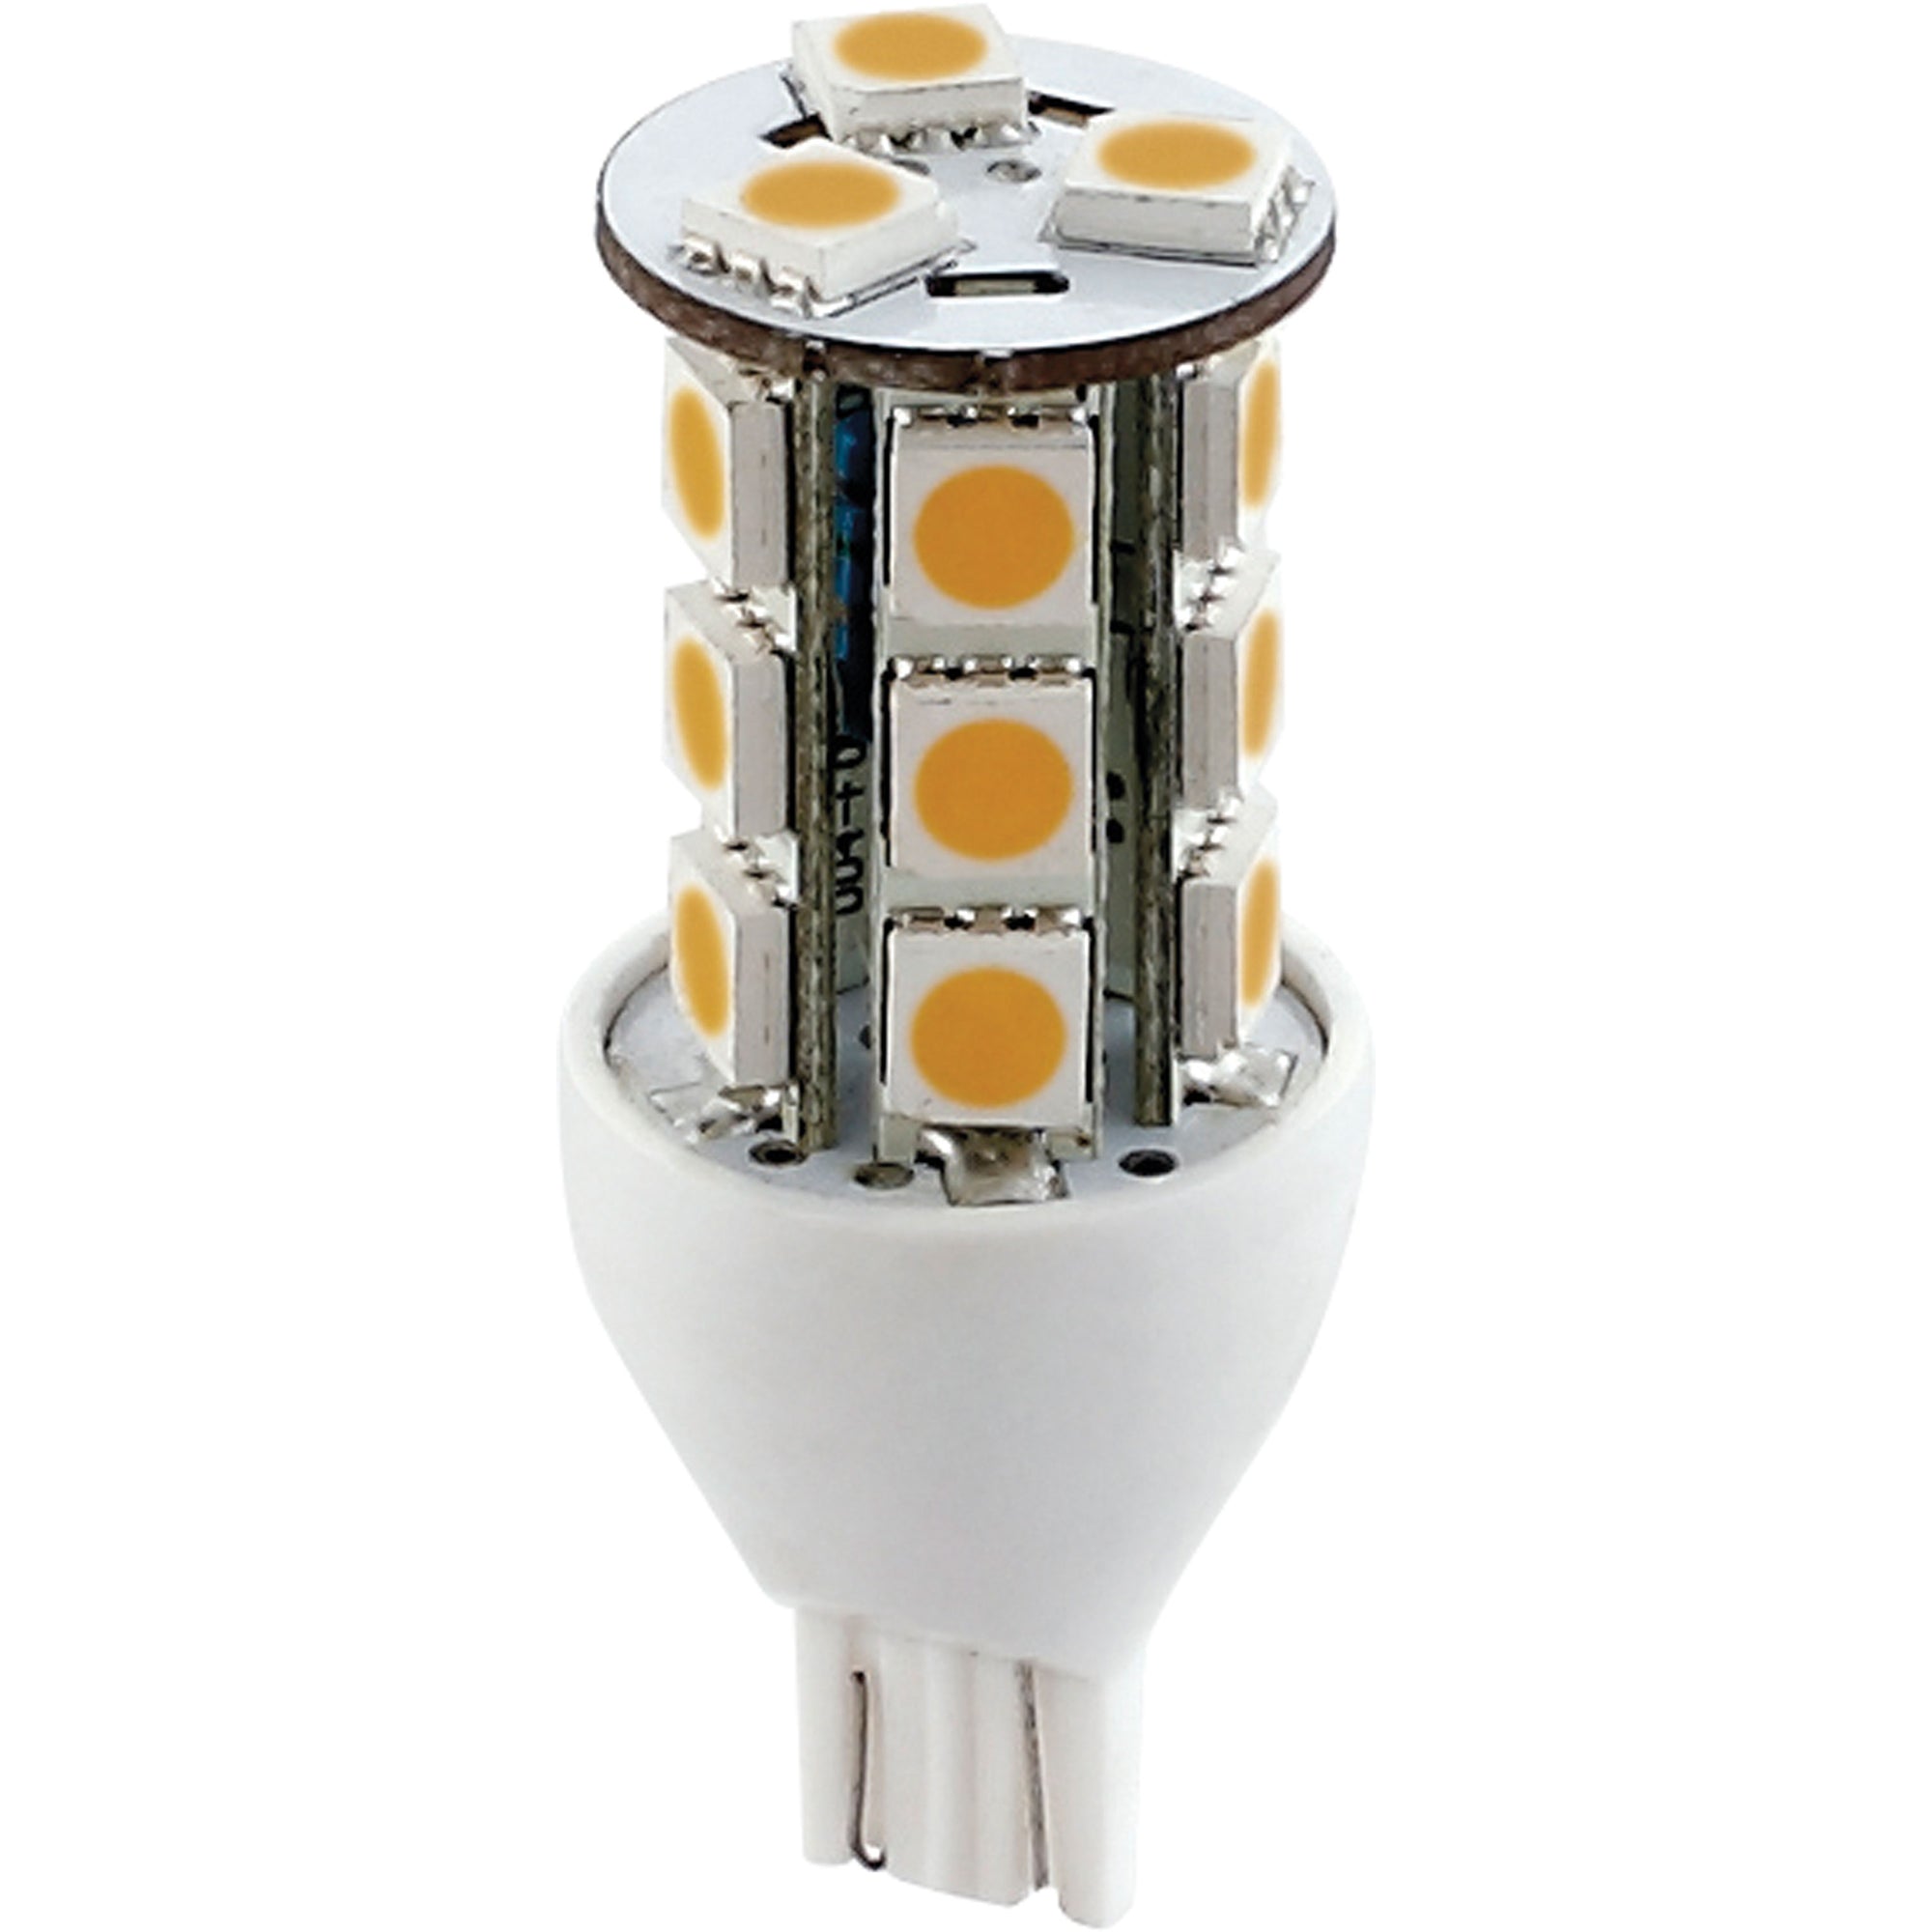 Ming's Mark 5050176 Green LongLife 12V Tower Bulb with 921 Base - 290 Lumens, Warm White